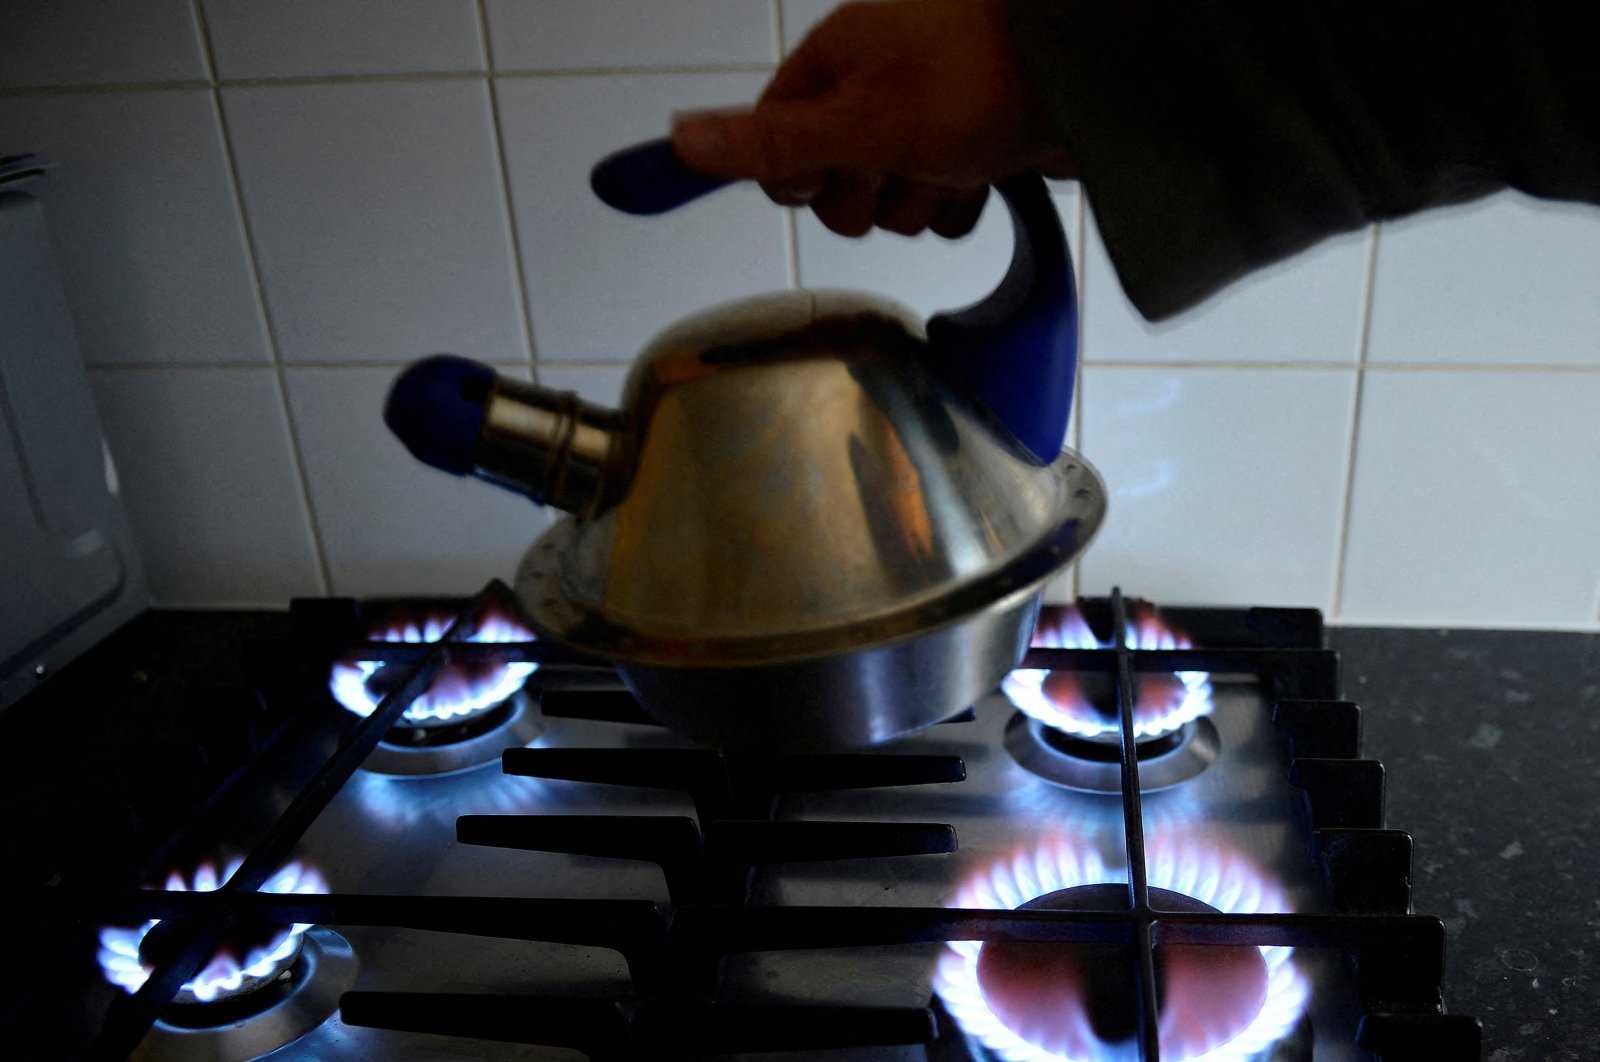 A gas cooker is seen in Boroughbridge, northern England, Nov. 13, 2012. (Reuters Photo)